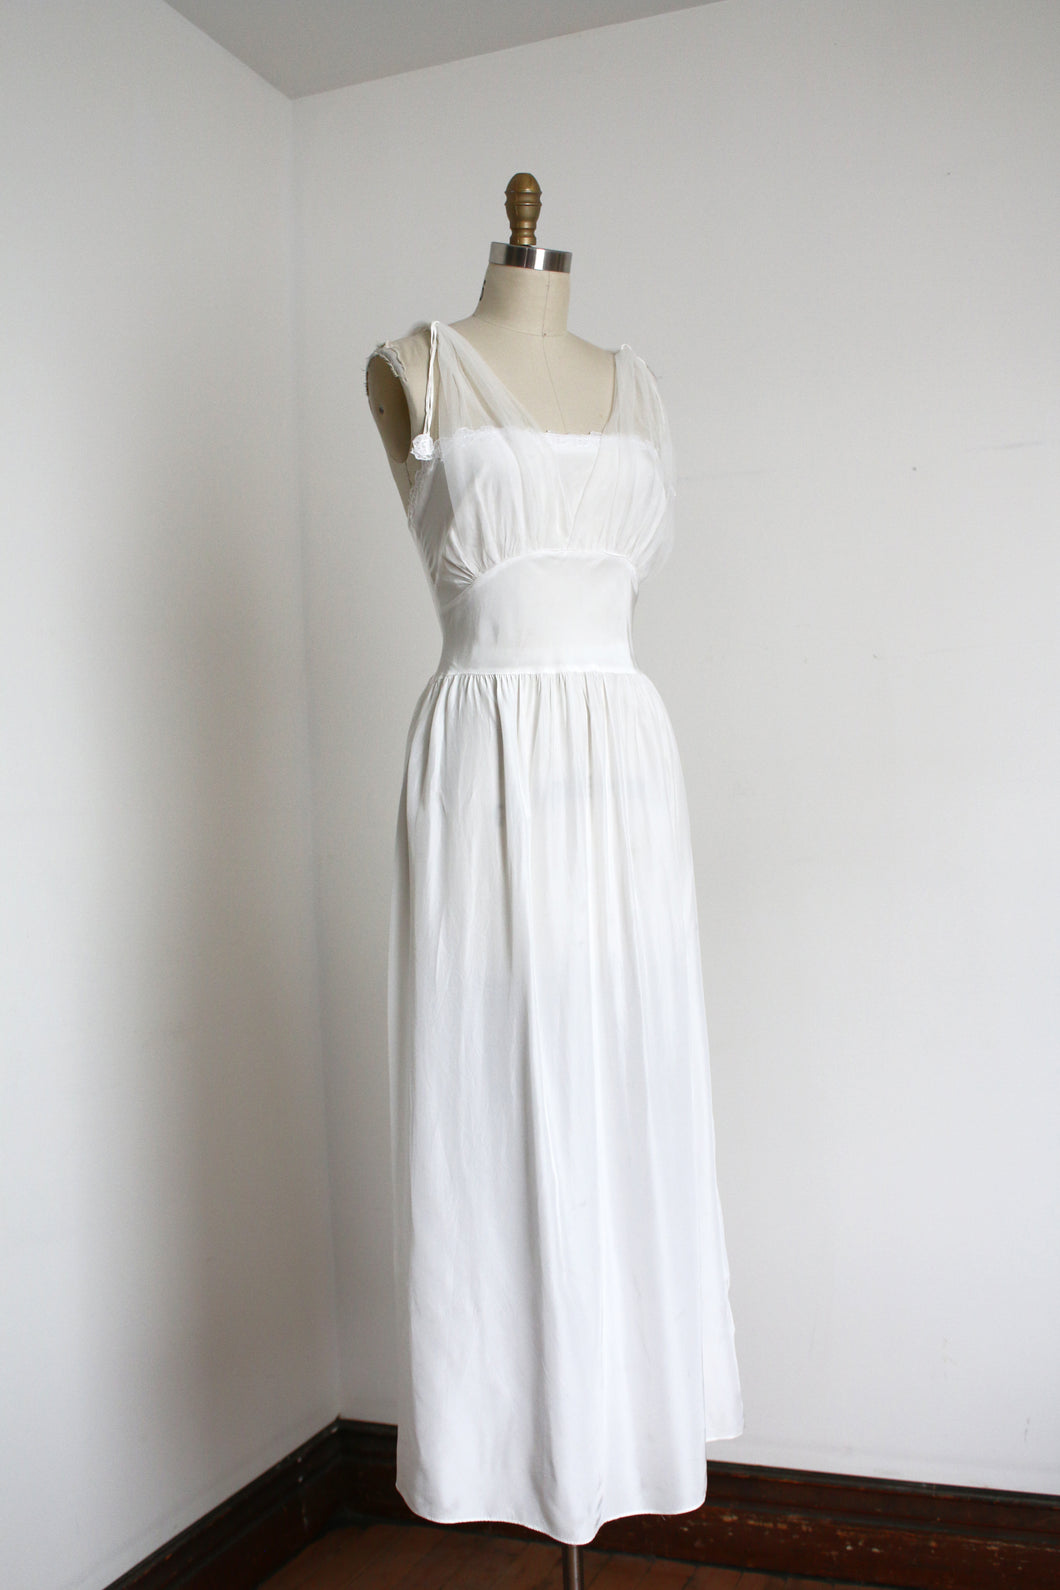 vintage 1930s 40s white nightgown lingerie {xs-s}